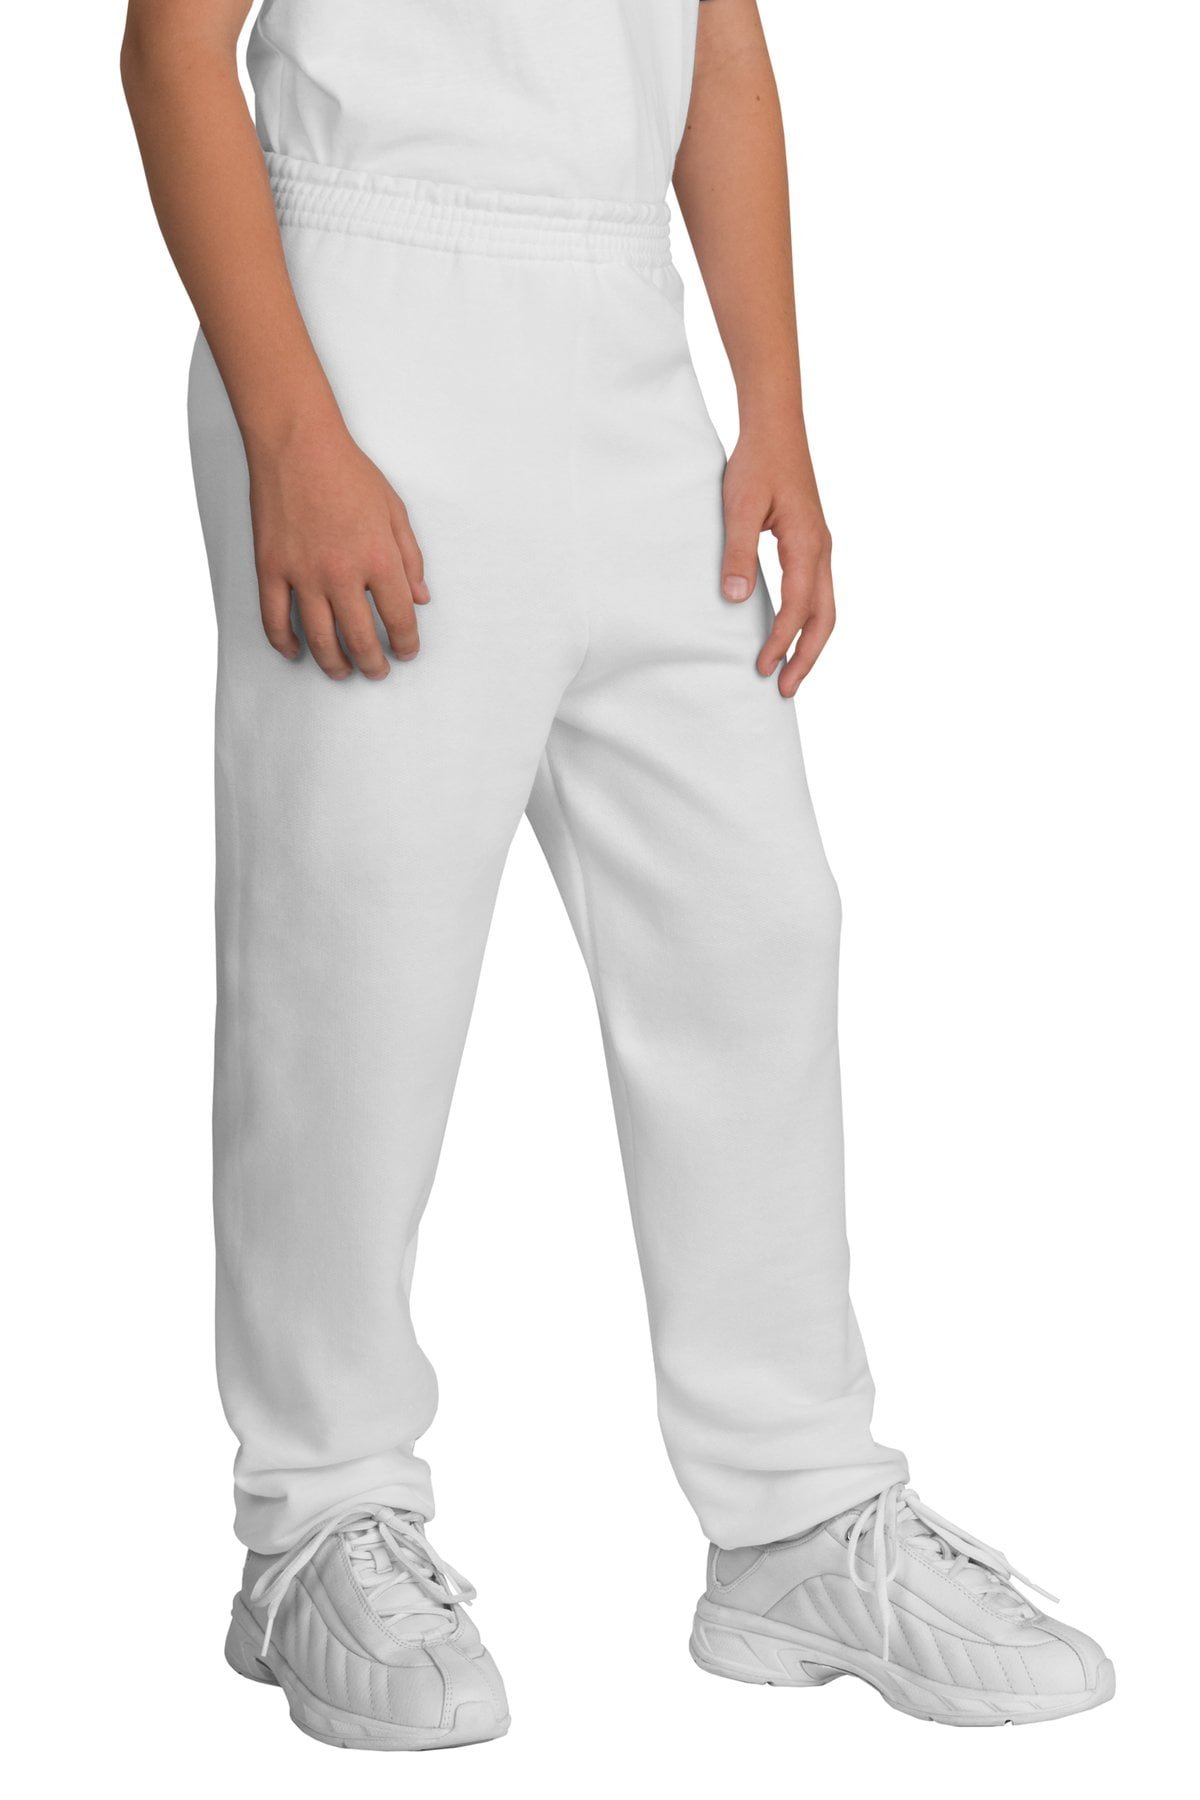 Old Navy Straight Fleece Sweatpants for Boys  Yorkdale Mall